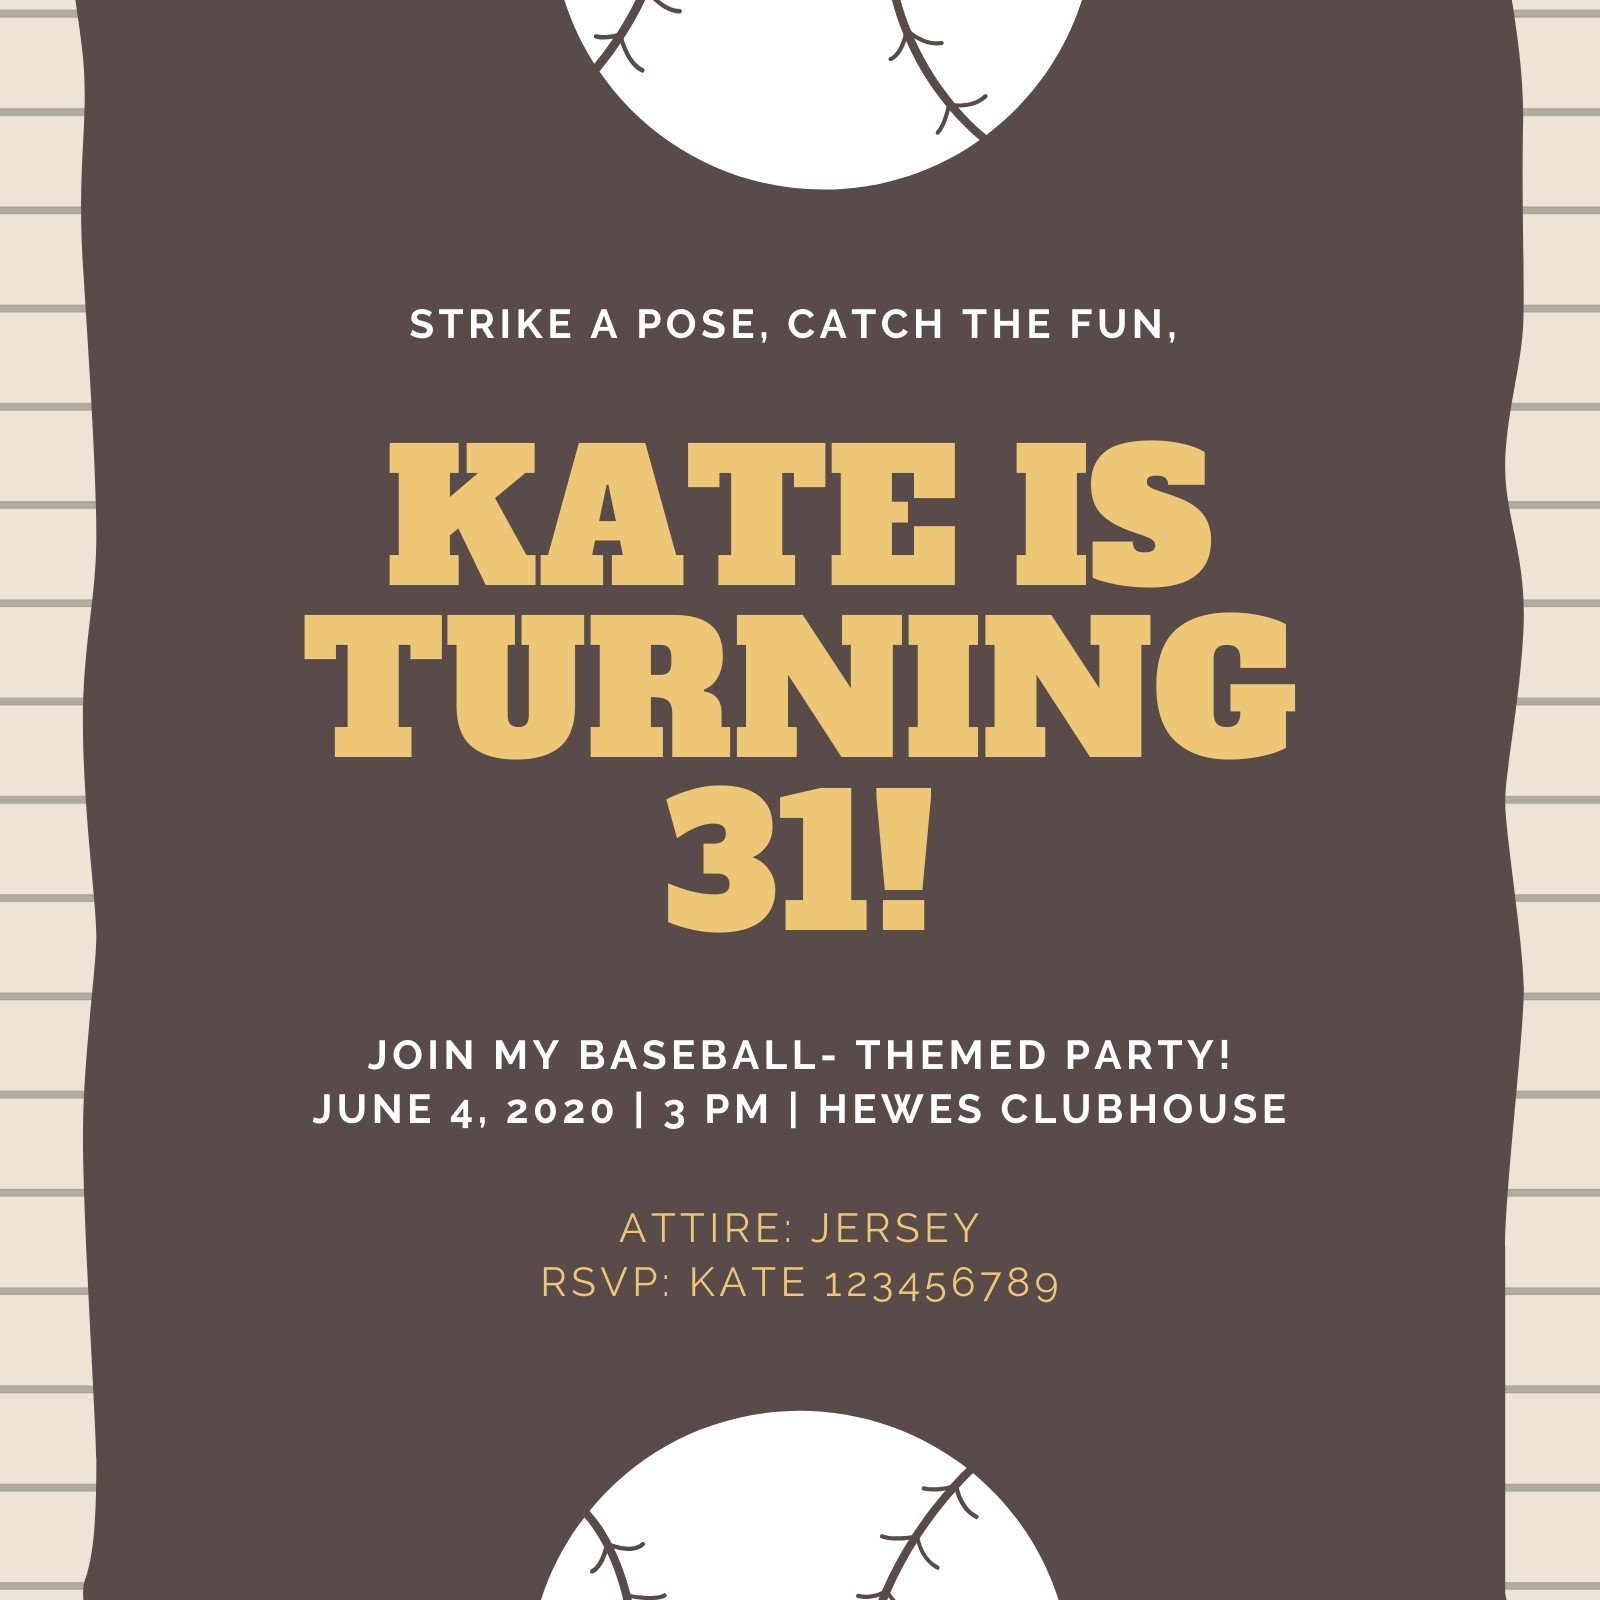 woddy-brown-line-patterned-baseball-invitation-templates-by-canva